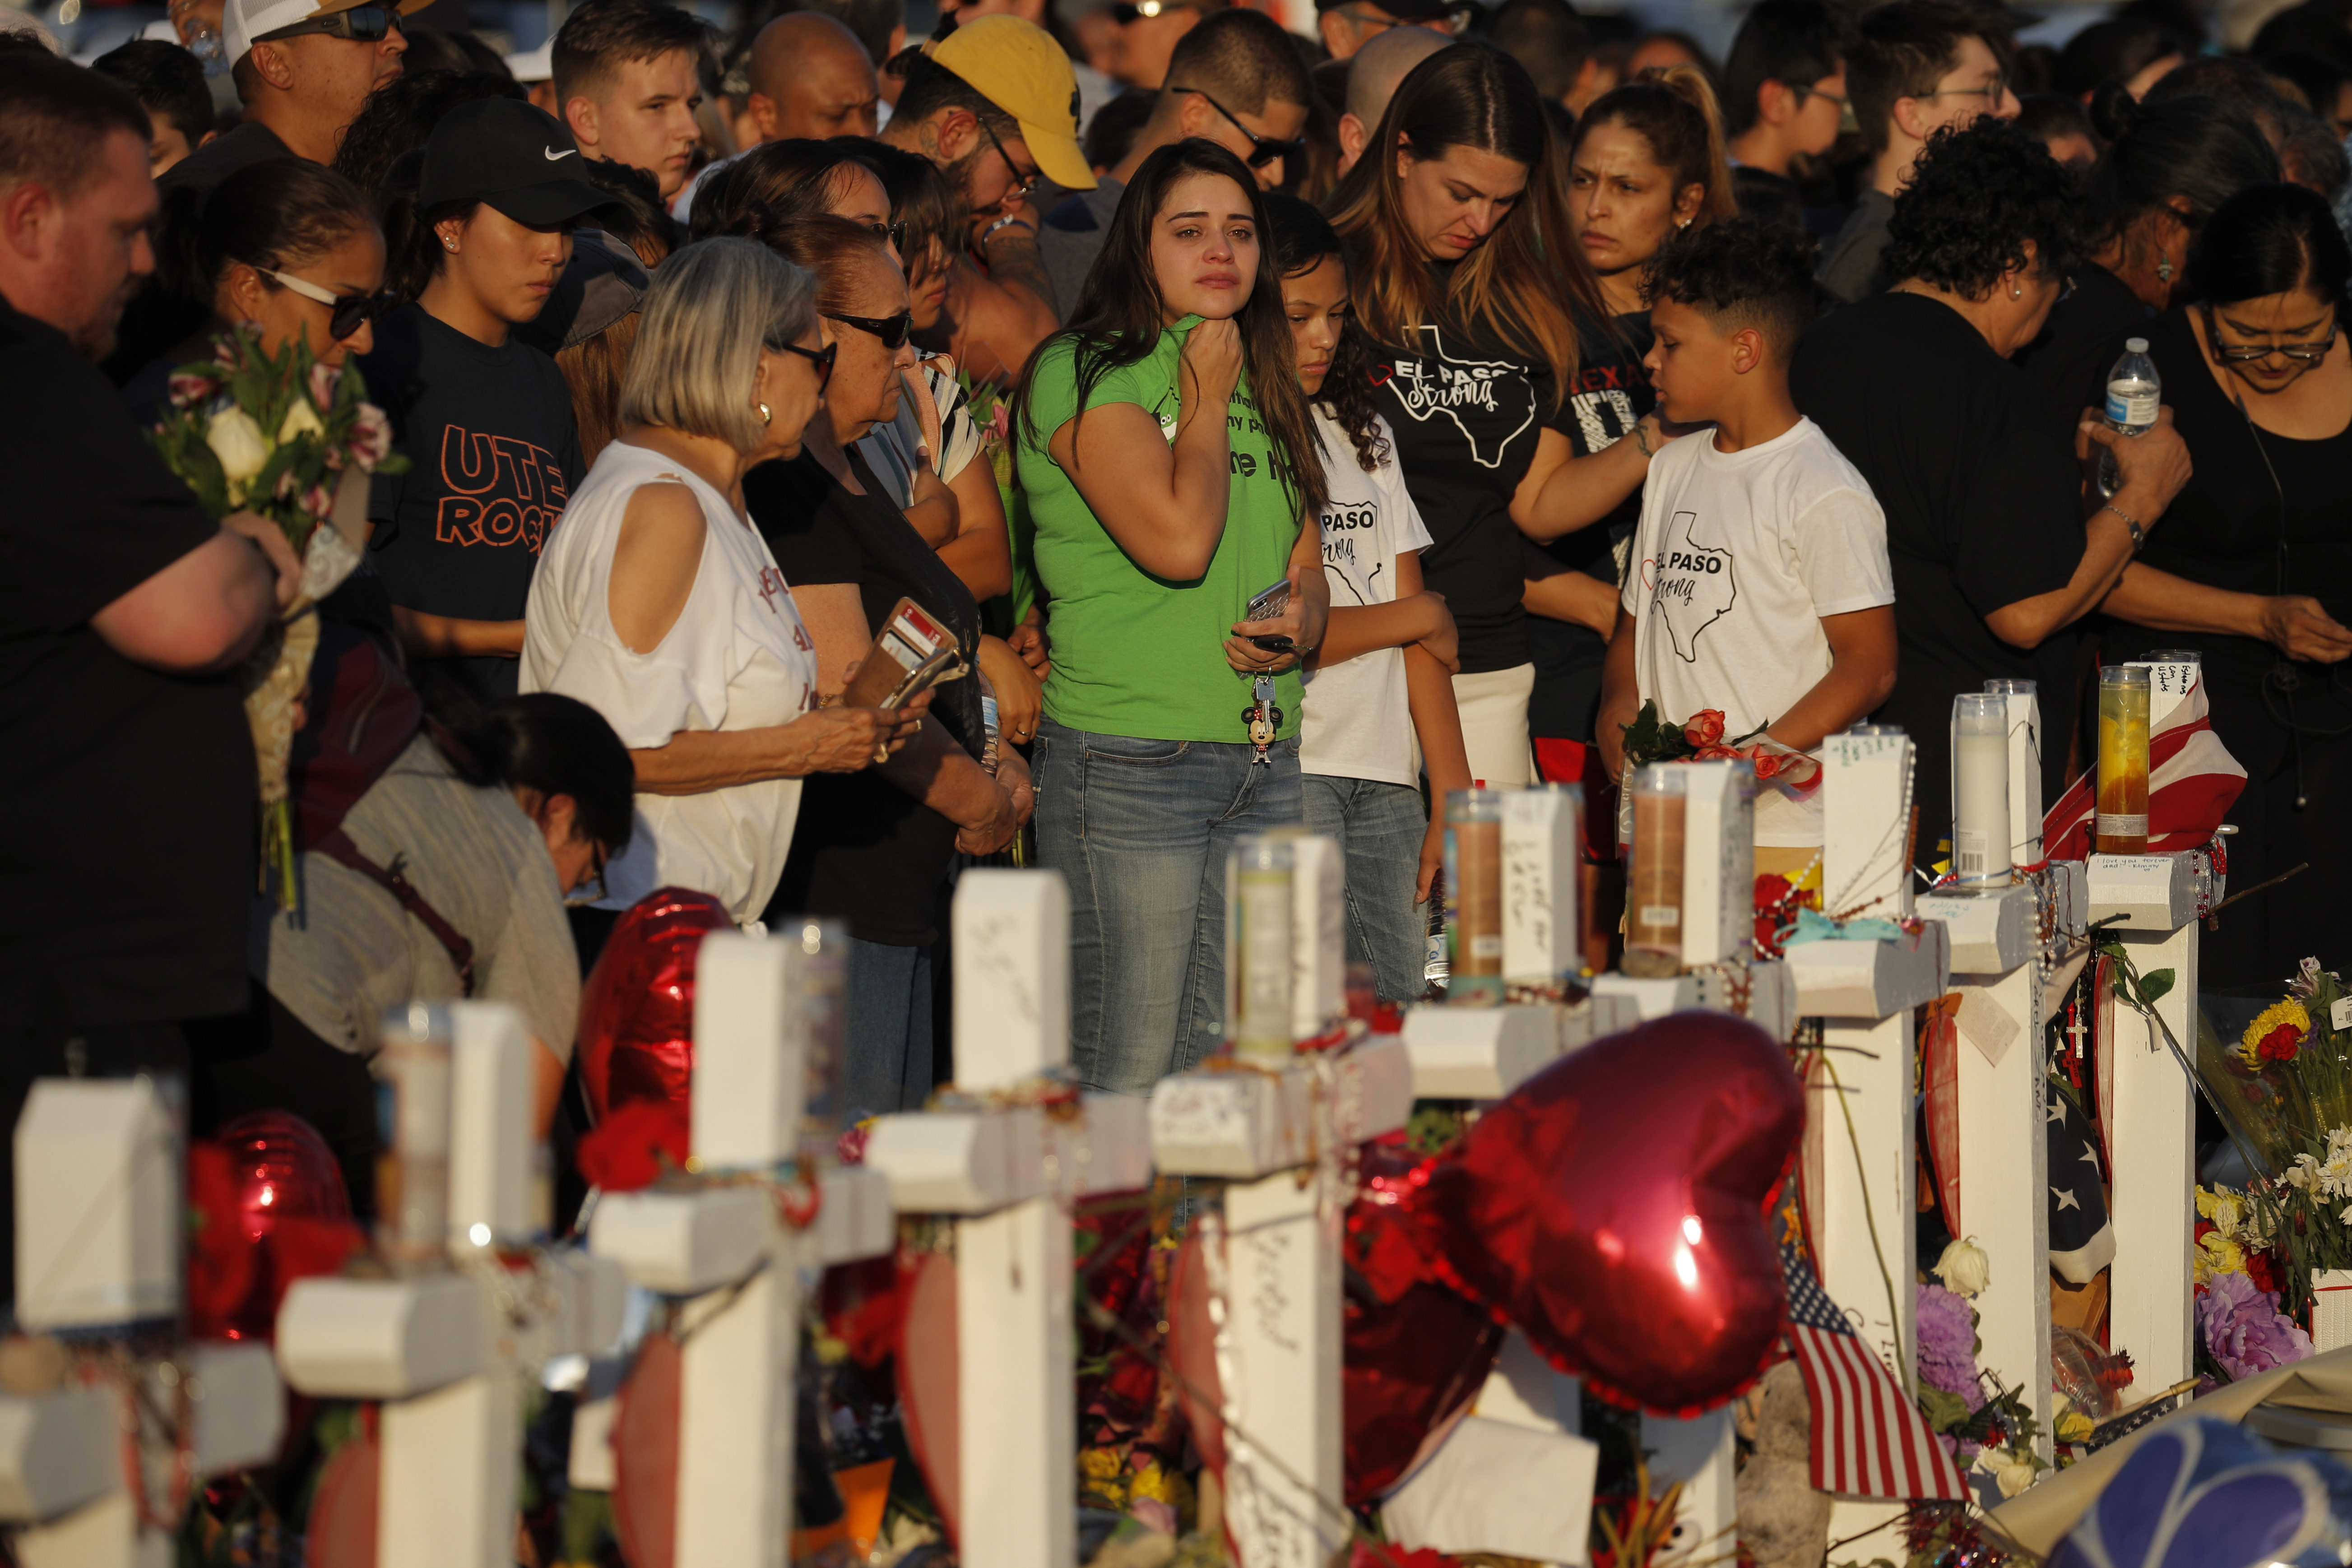 FILE - In this Aug. 6, 2019, file photo, people visit a makeshift memorial at the scene of a mass shooting at a shopping complex in El Paso, Texas. At the growing memorial for the victims of this Saturday massacre, the city’s roots in Catholicism and religion in general loom large. (AP Photo/John Locher, File)